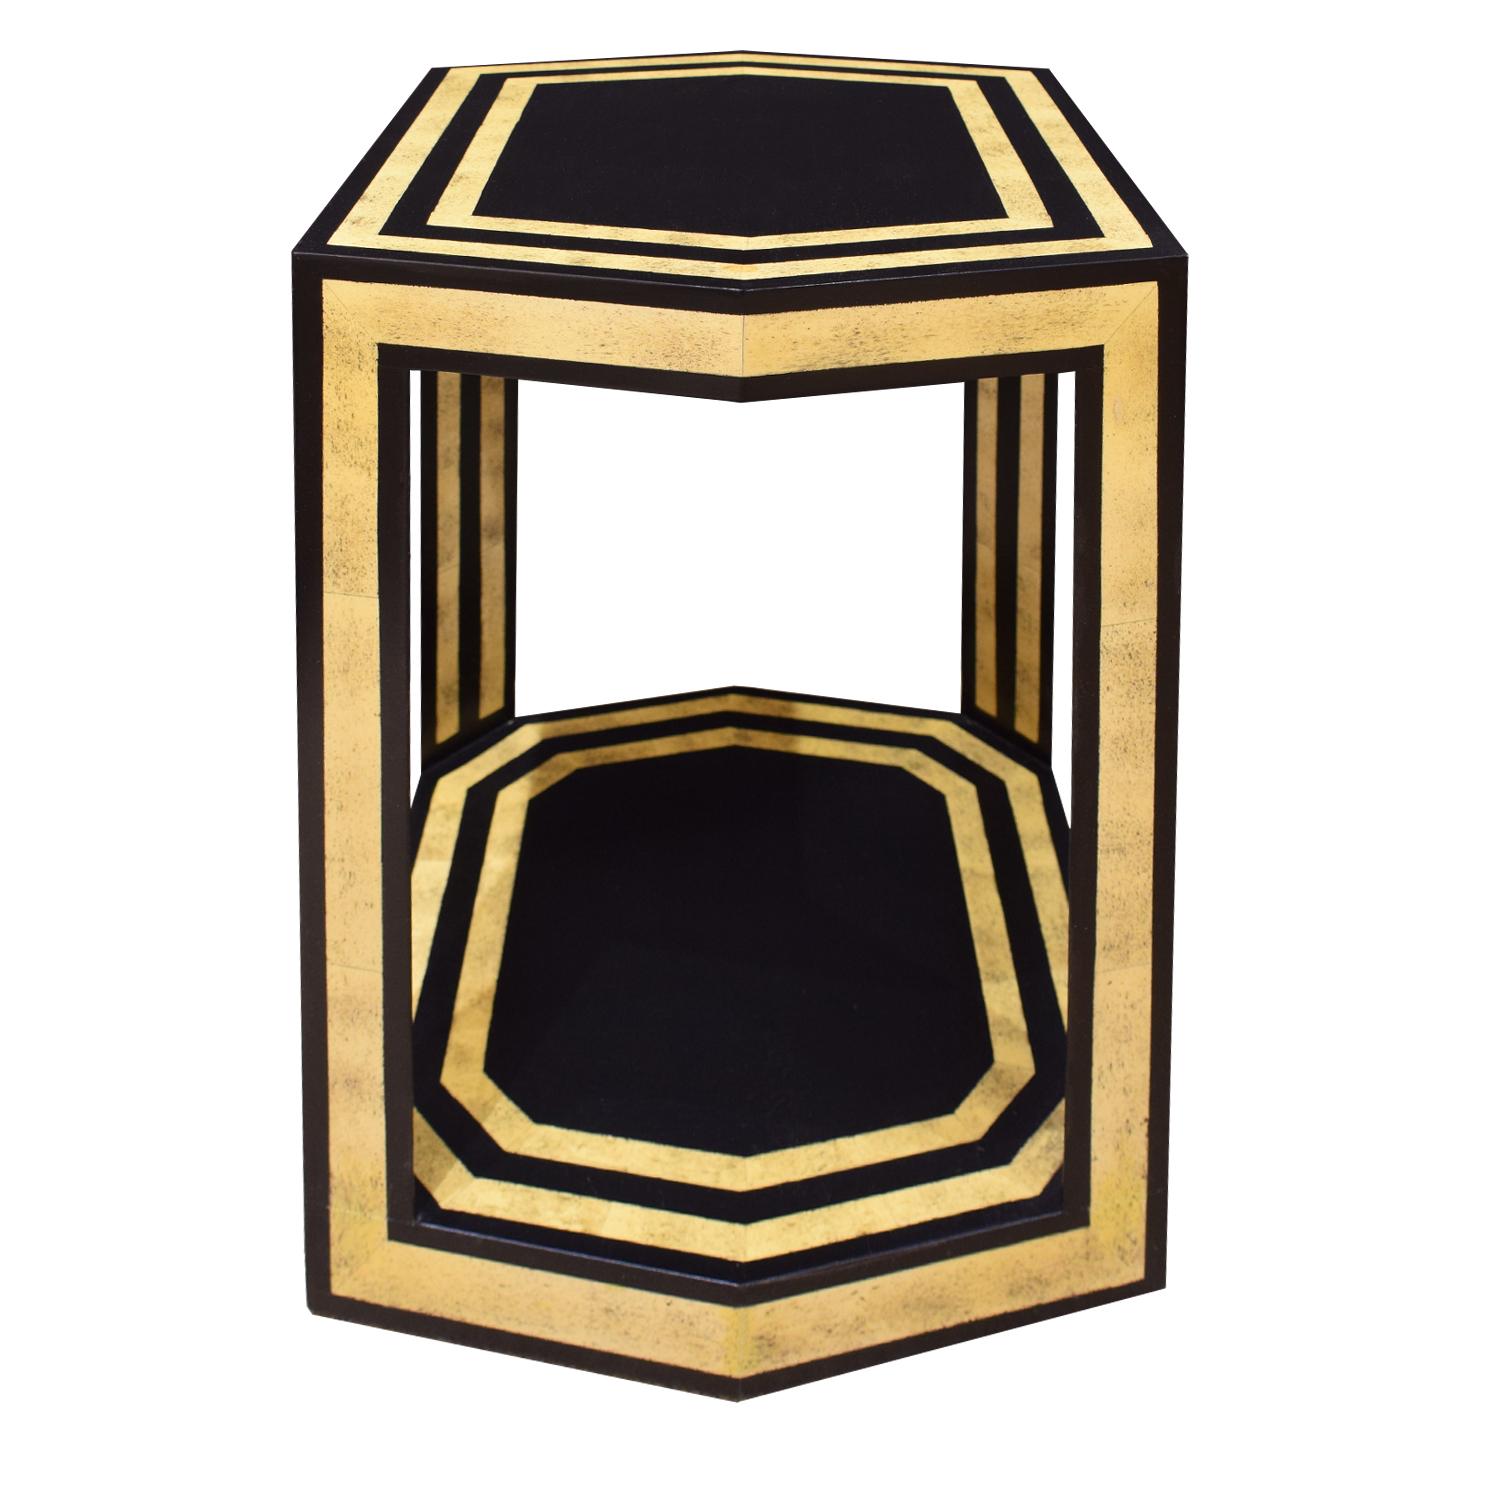 Hand-Painted Karl Springer Pair of End Tables in Black Lacquer with Bone Inlays, 1970s For Sale